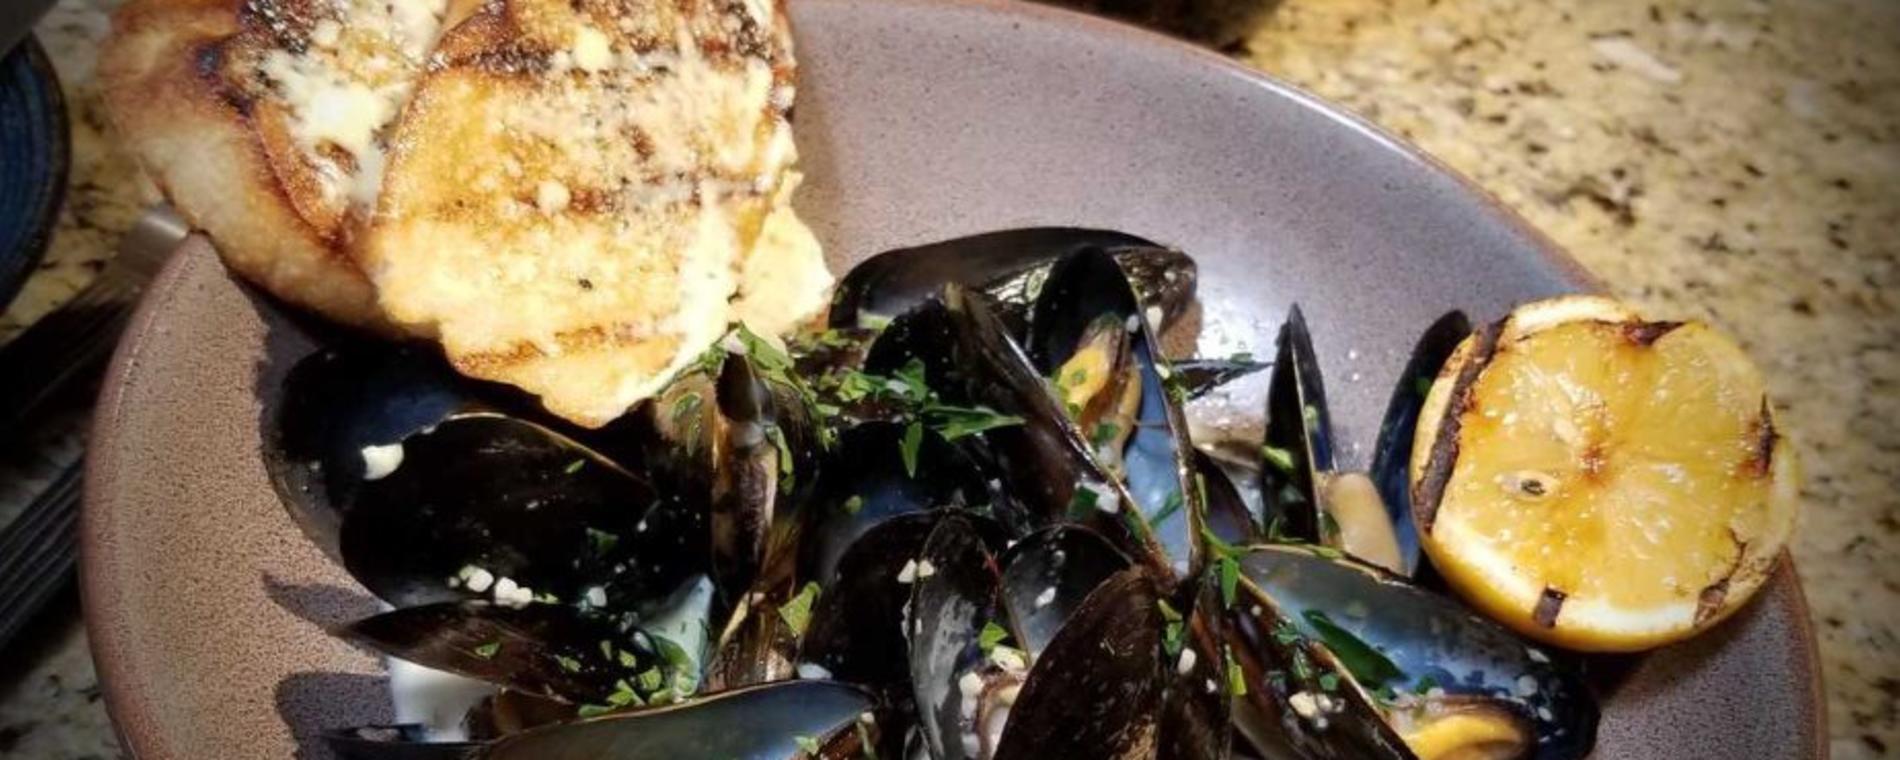 Chisholm's Mussels